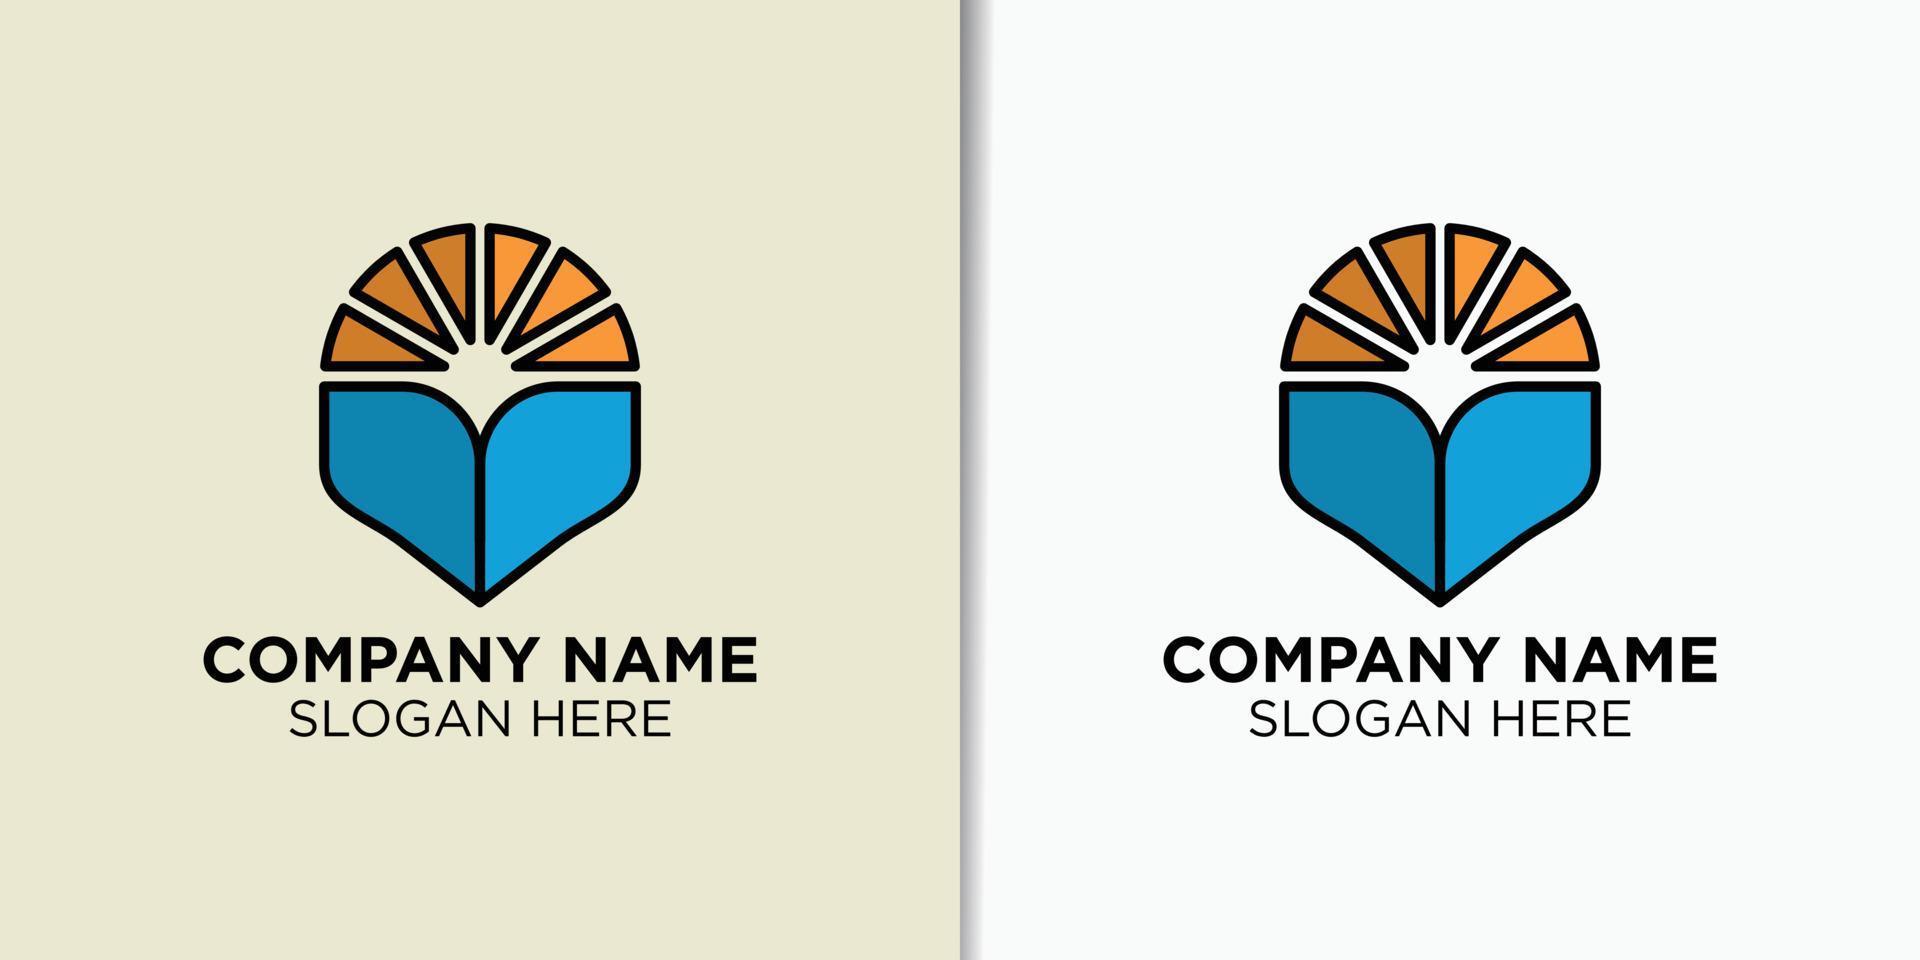 simple whale logo template, travel logo inspiration vector